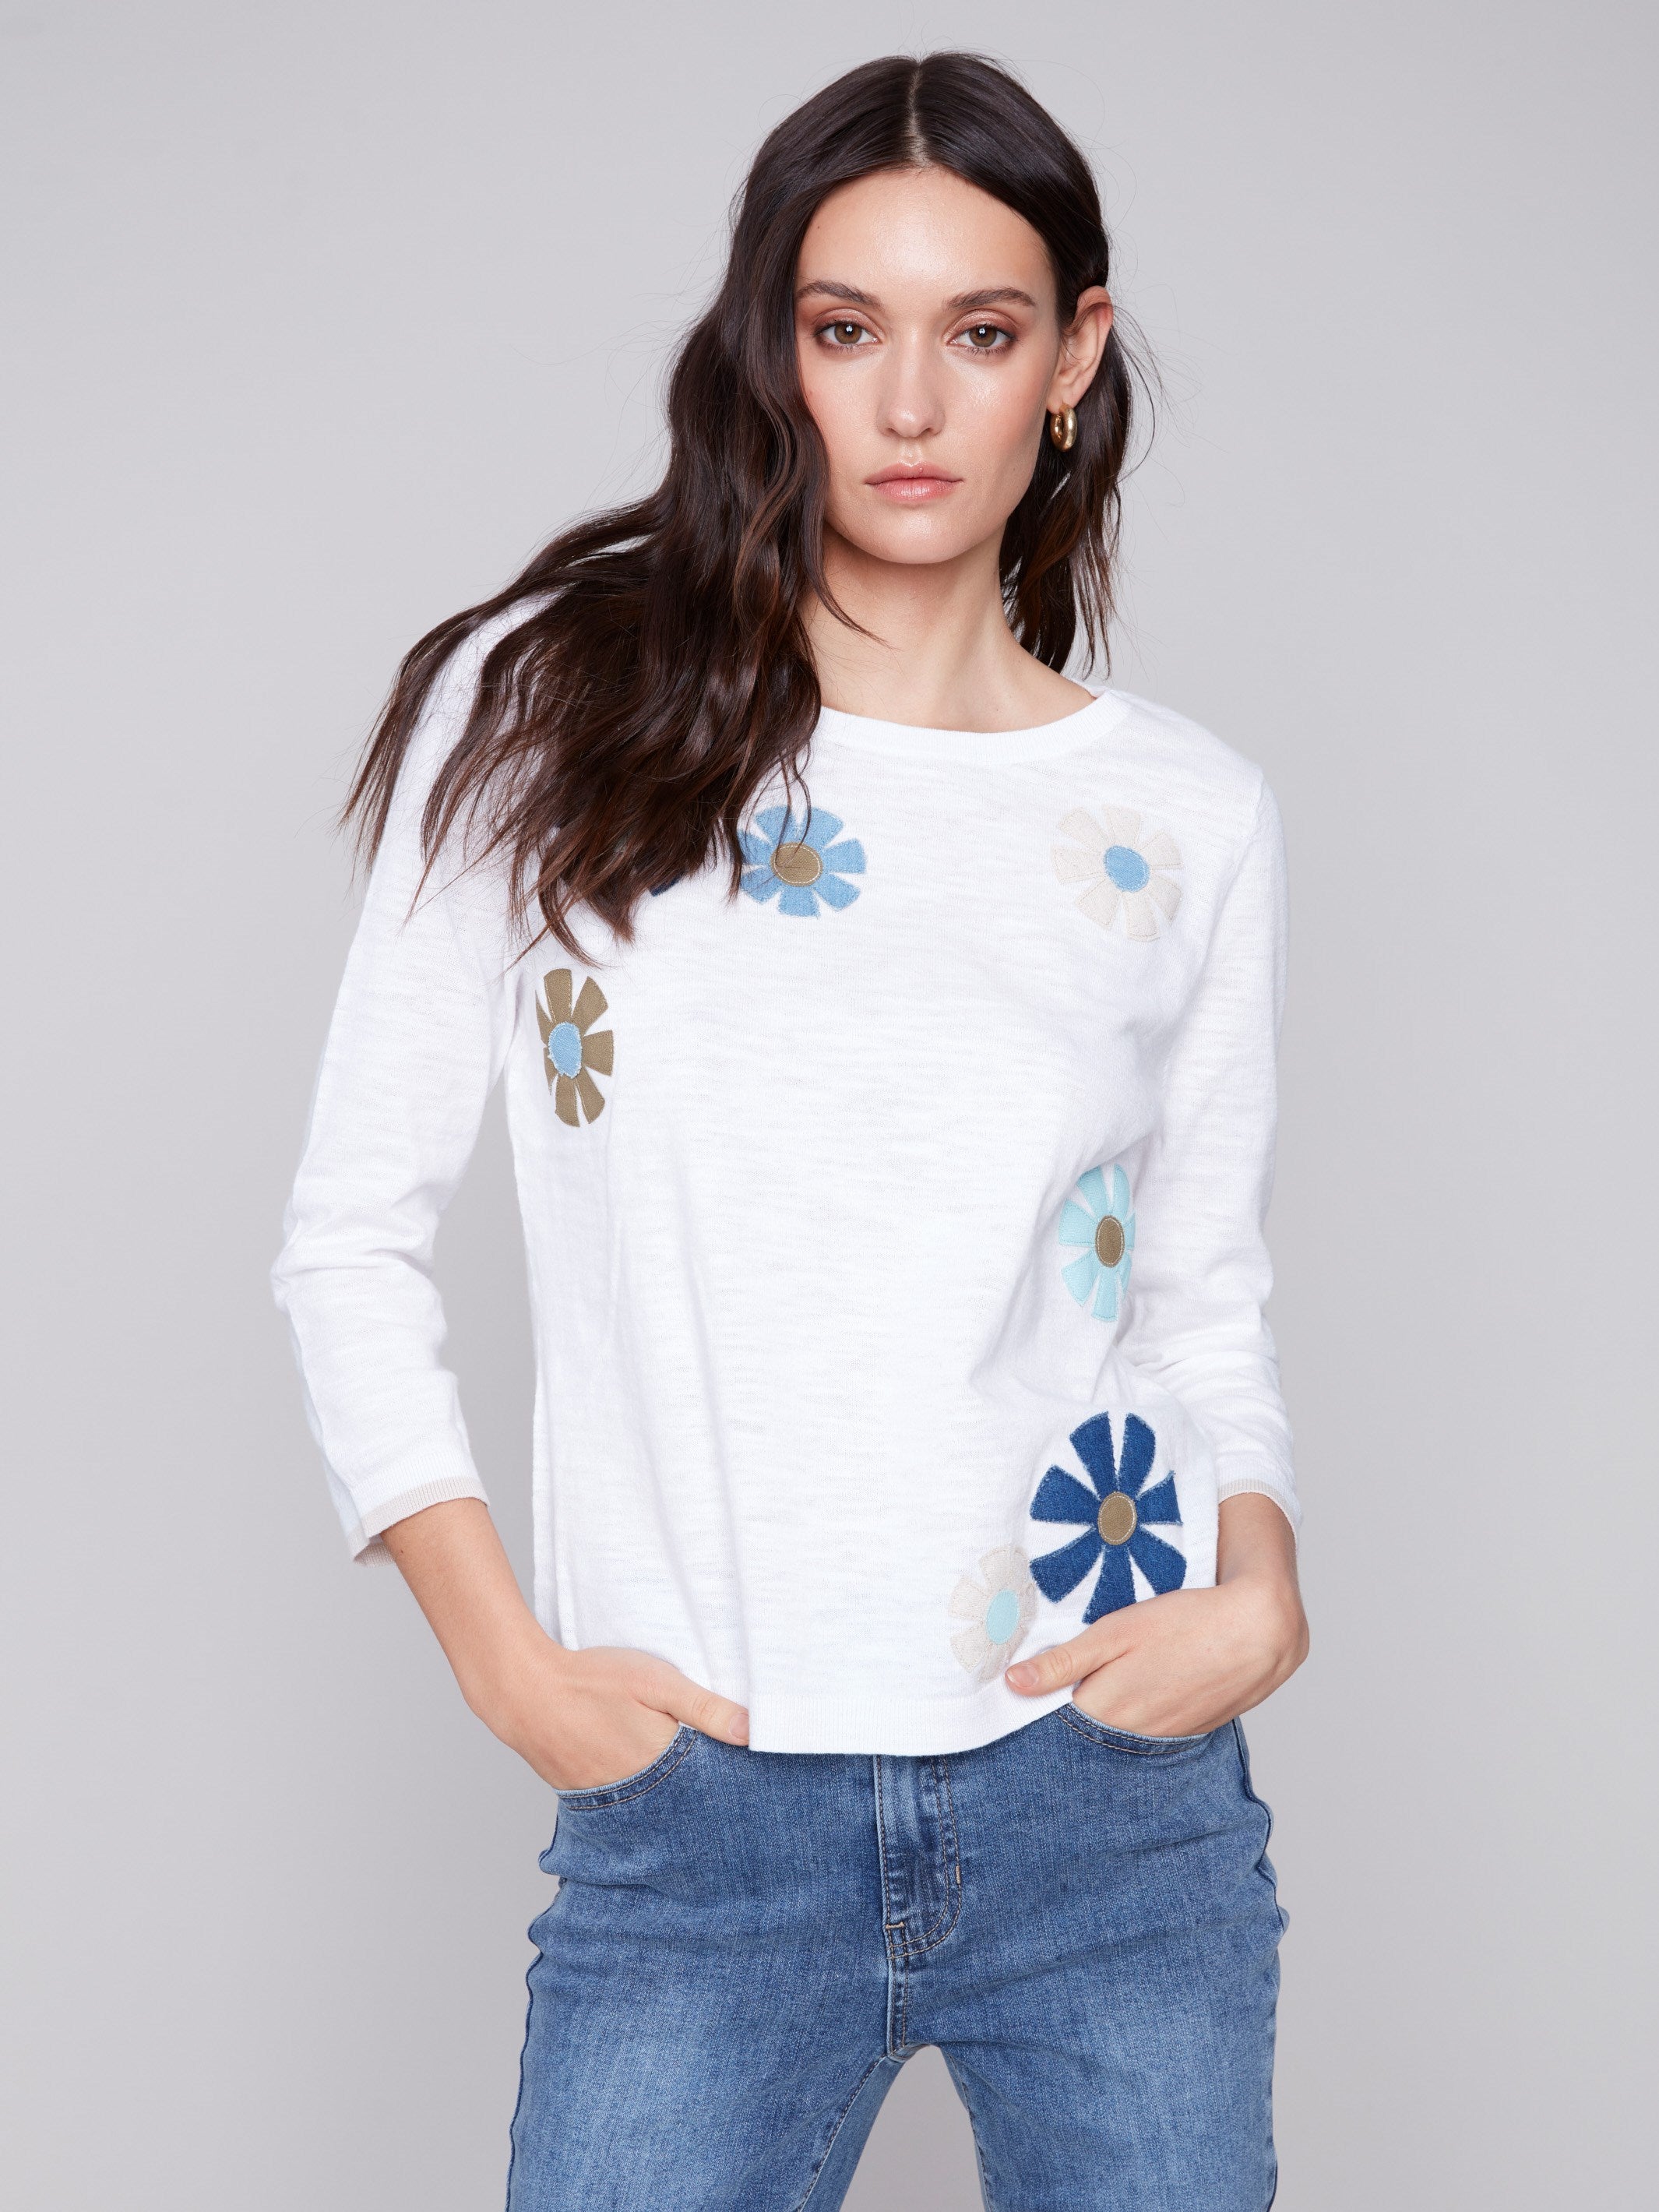 Charlie B Sweater with Flower Patches - White - Image 1